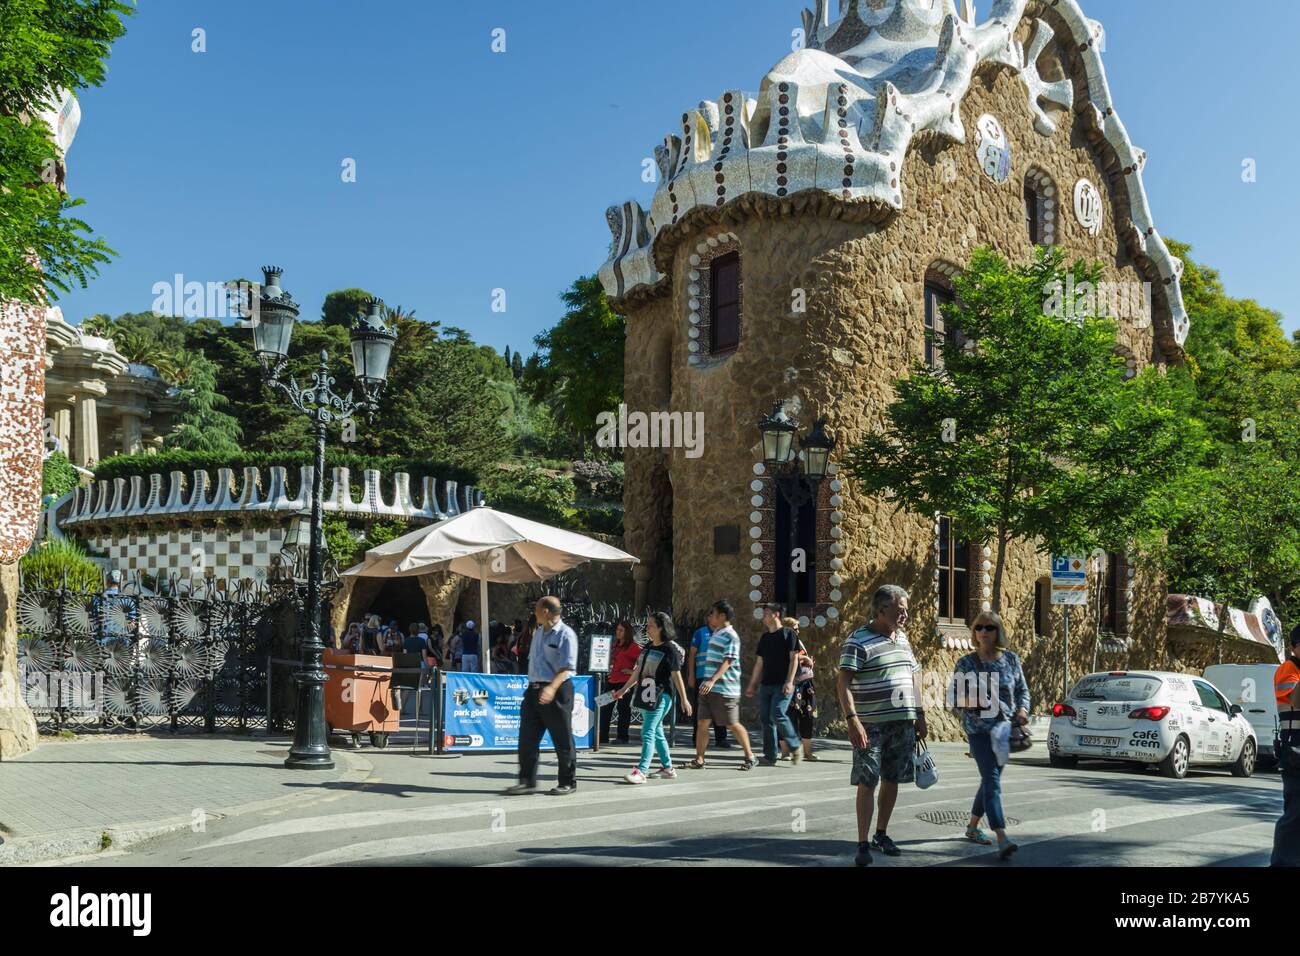 BARCELONA, SPAIN - JUNE 22, 2016: People near main entrance to the Park Guell. Verdant park with Gaudi museum and panoramic views. By architect Gaudi. Stock Photo